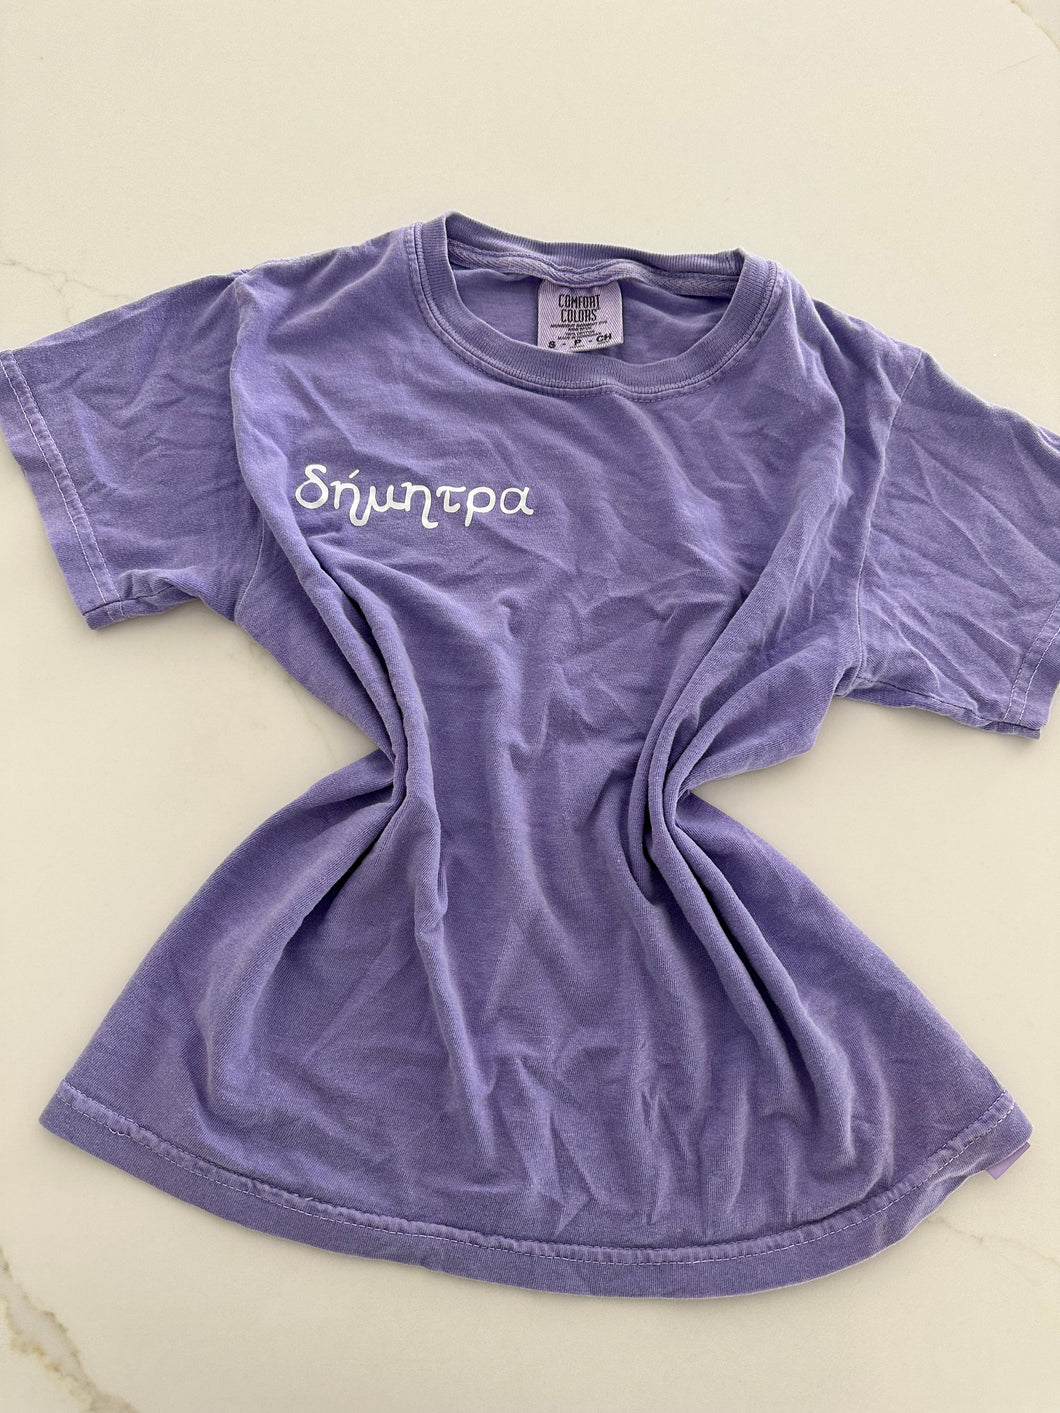 Personalized Greek T-Shirt - Your Name! (style A)